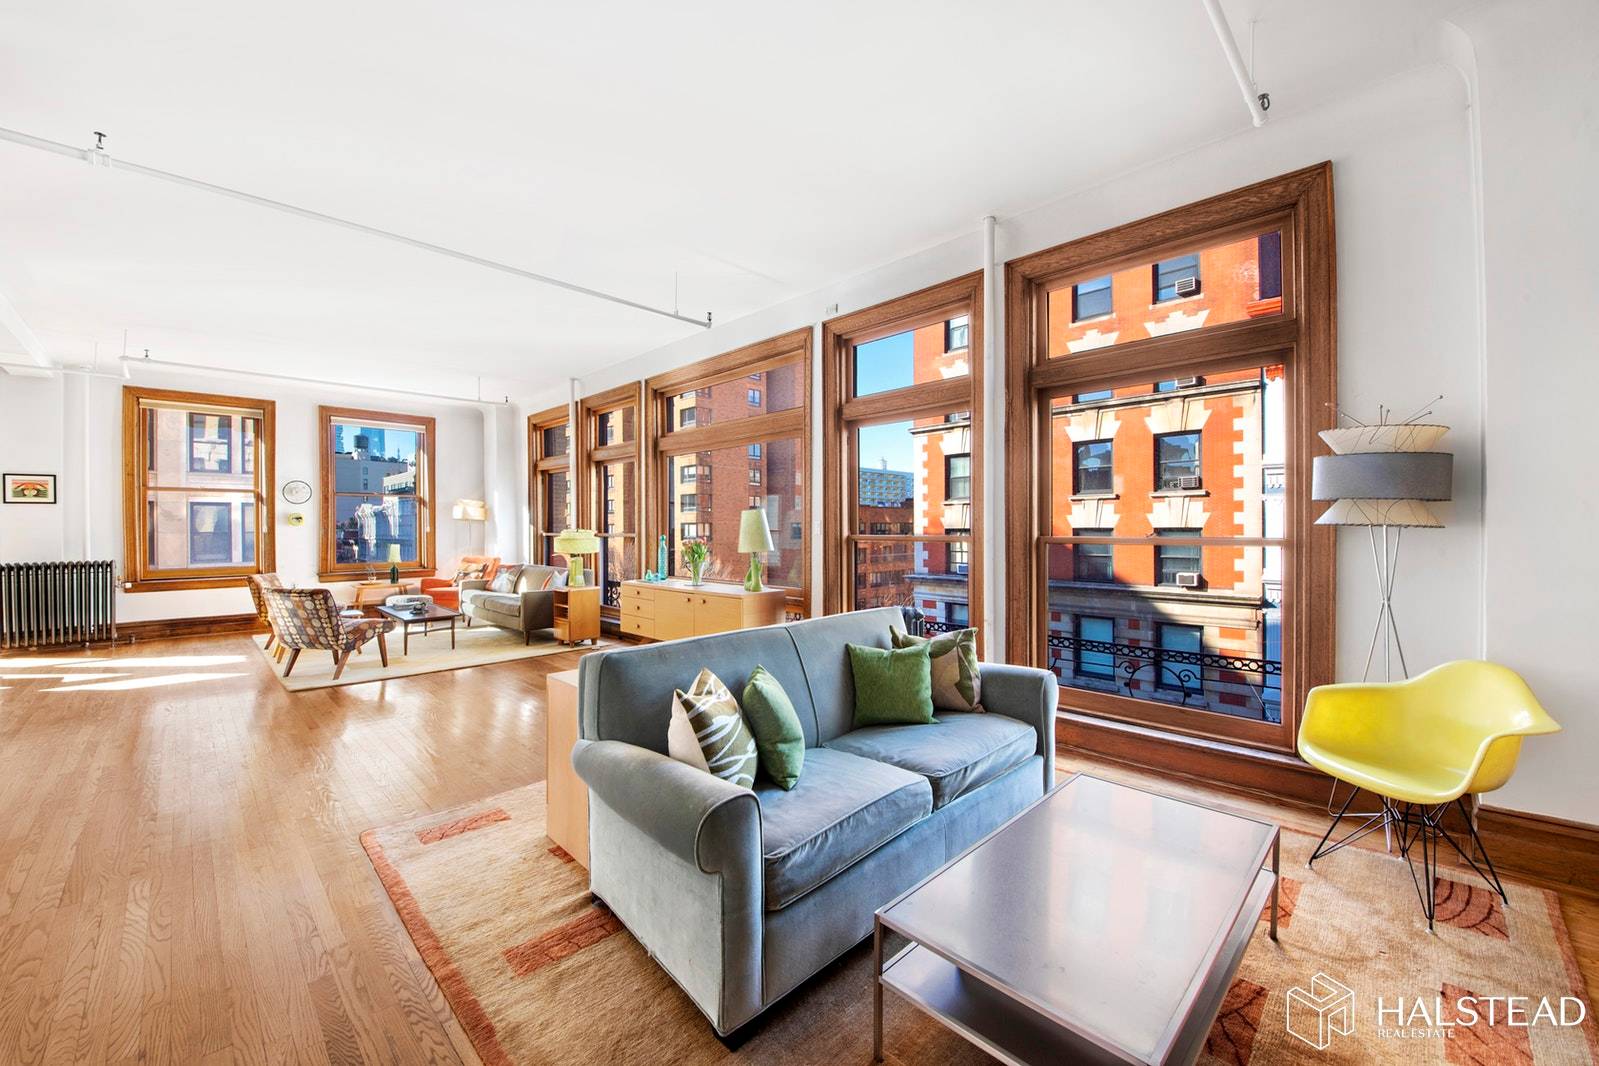 Enjoy brilliant light and open views from 16 oversized windows in this sprawling 2, 200 square foot Prewar loft located right at the crossroads of Soho, Noho and Greenwich Village.